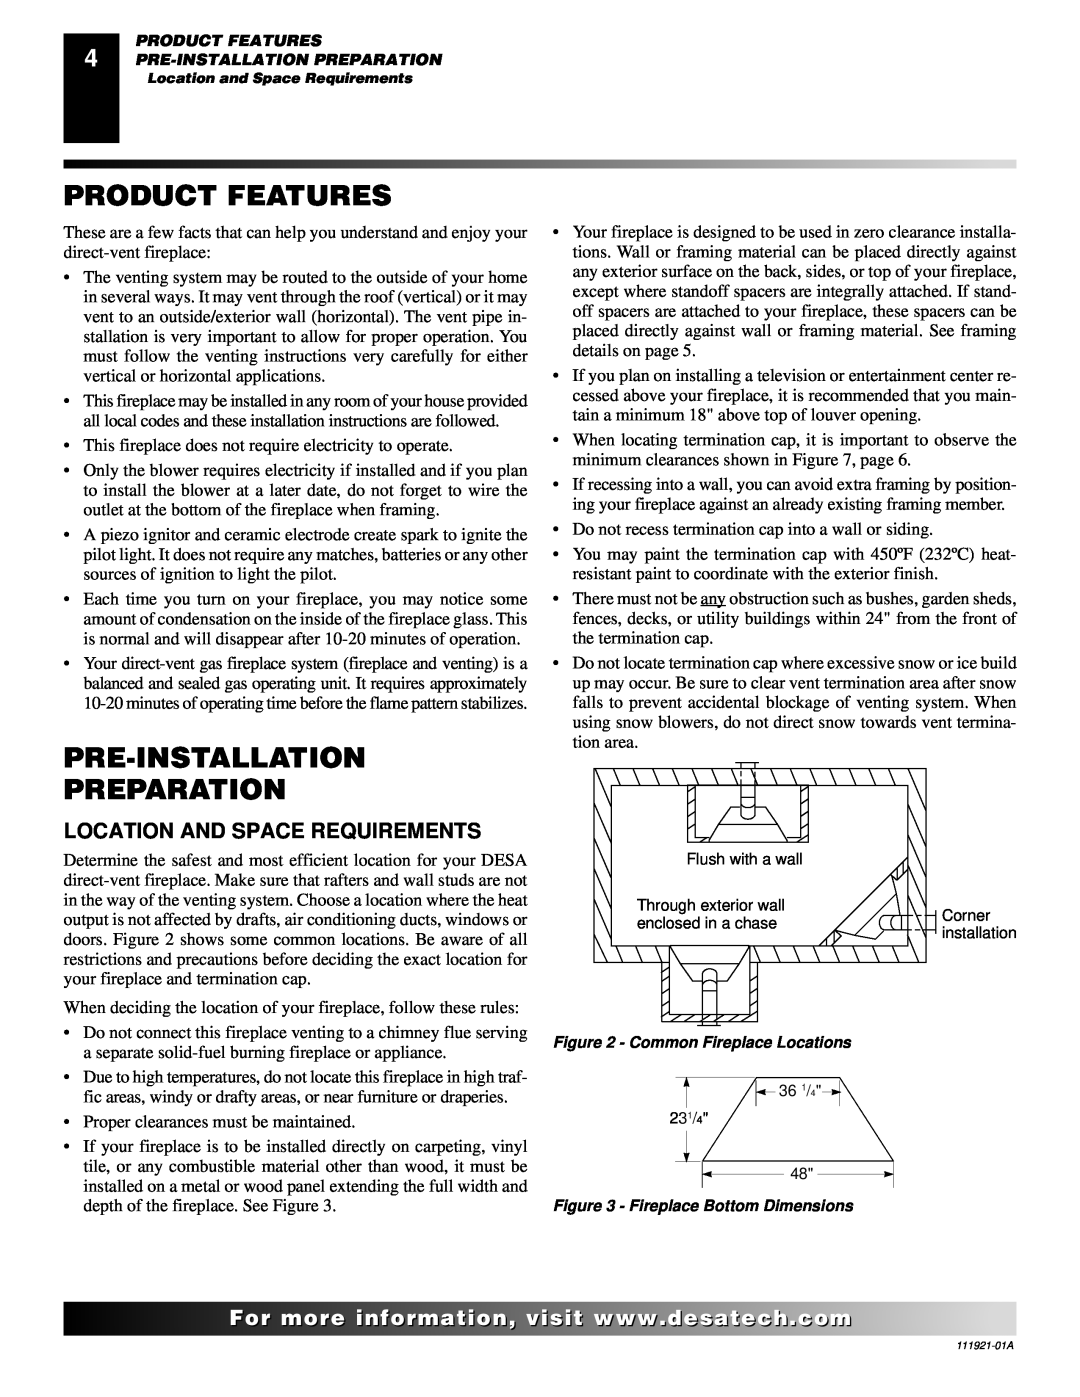 Desa (V)K42N installation manual Product Features, Pre-Installation Preparation, Location And Space Requirements 